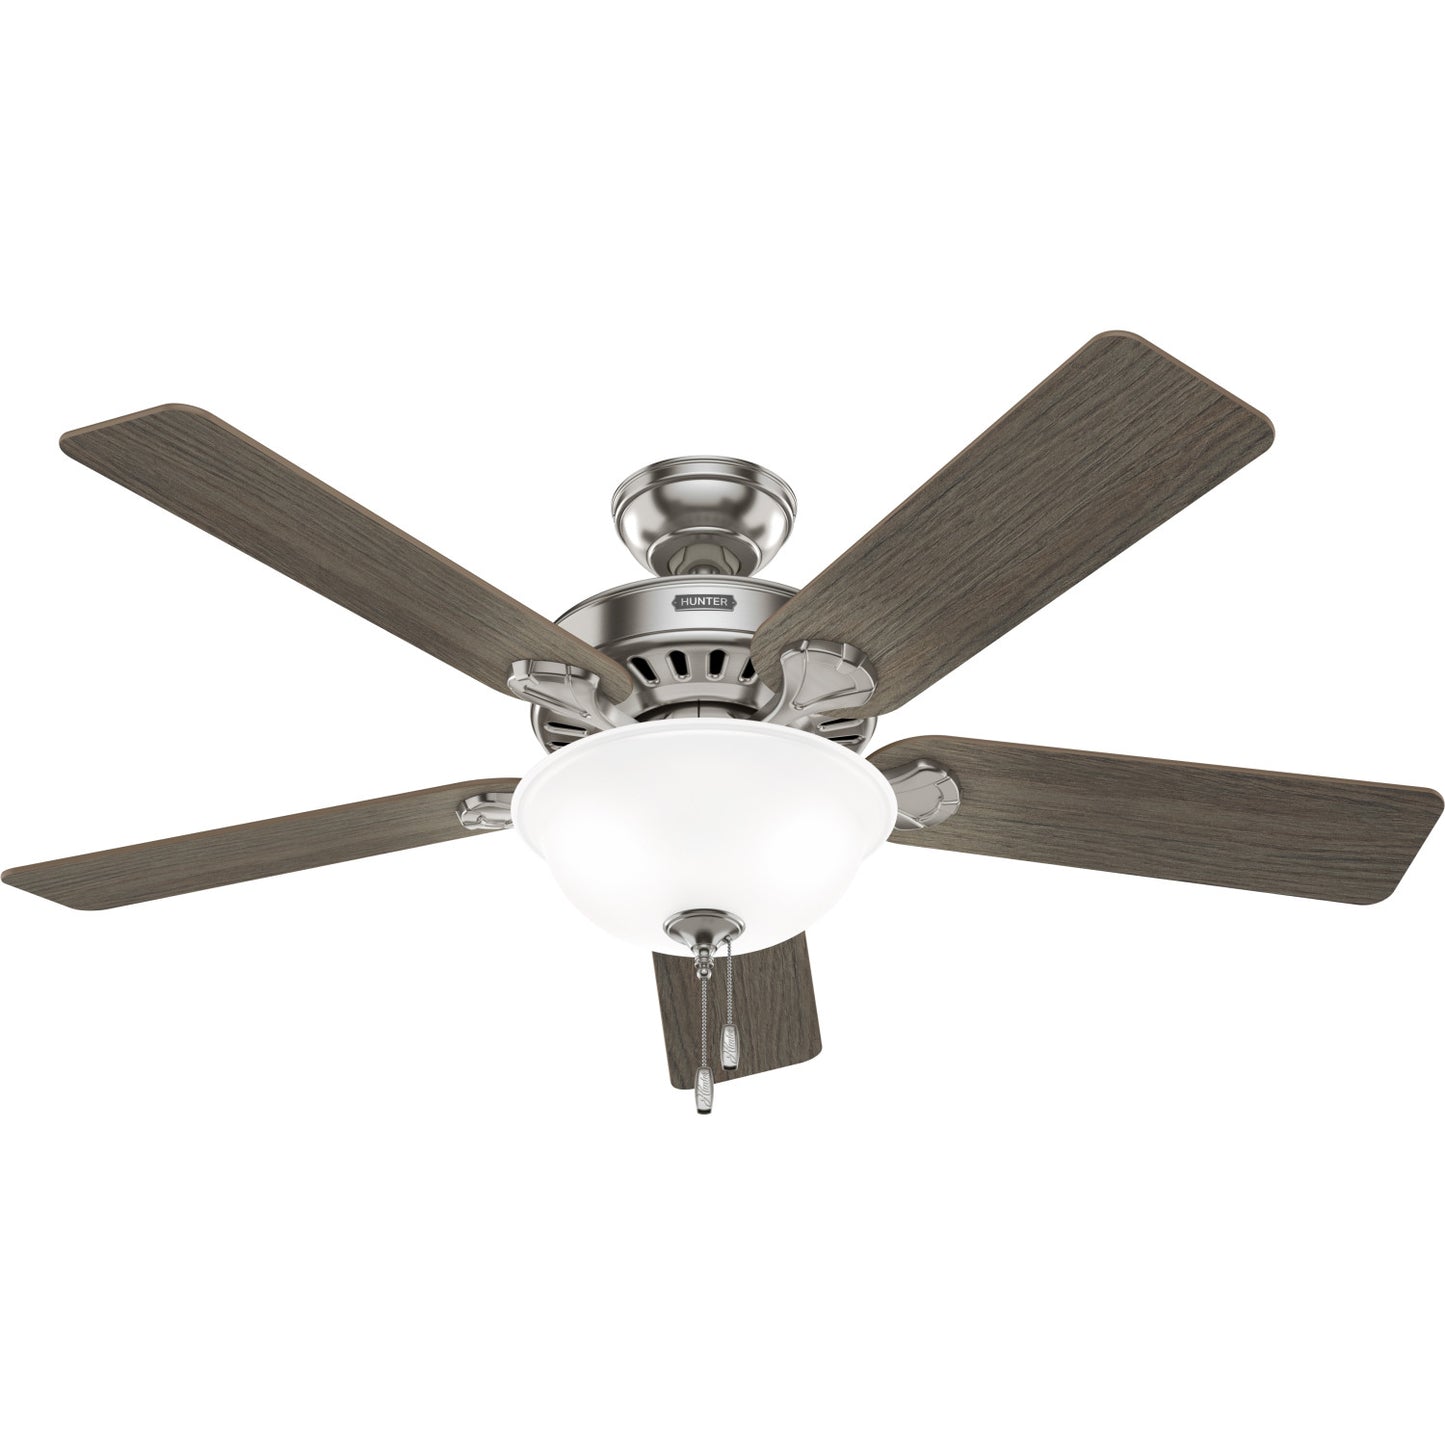 Pro's Best ENERGY STAR DC with Light 52 inch